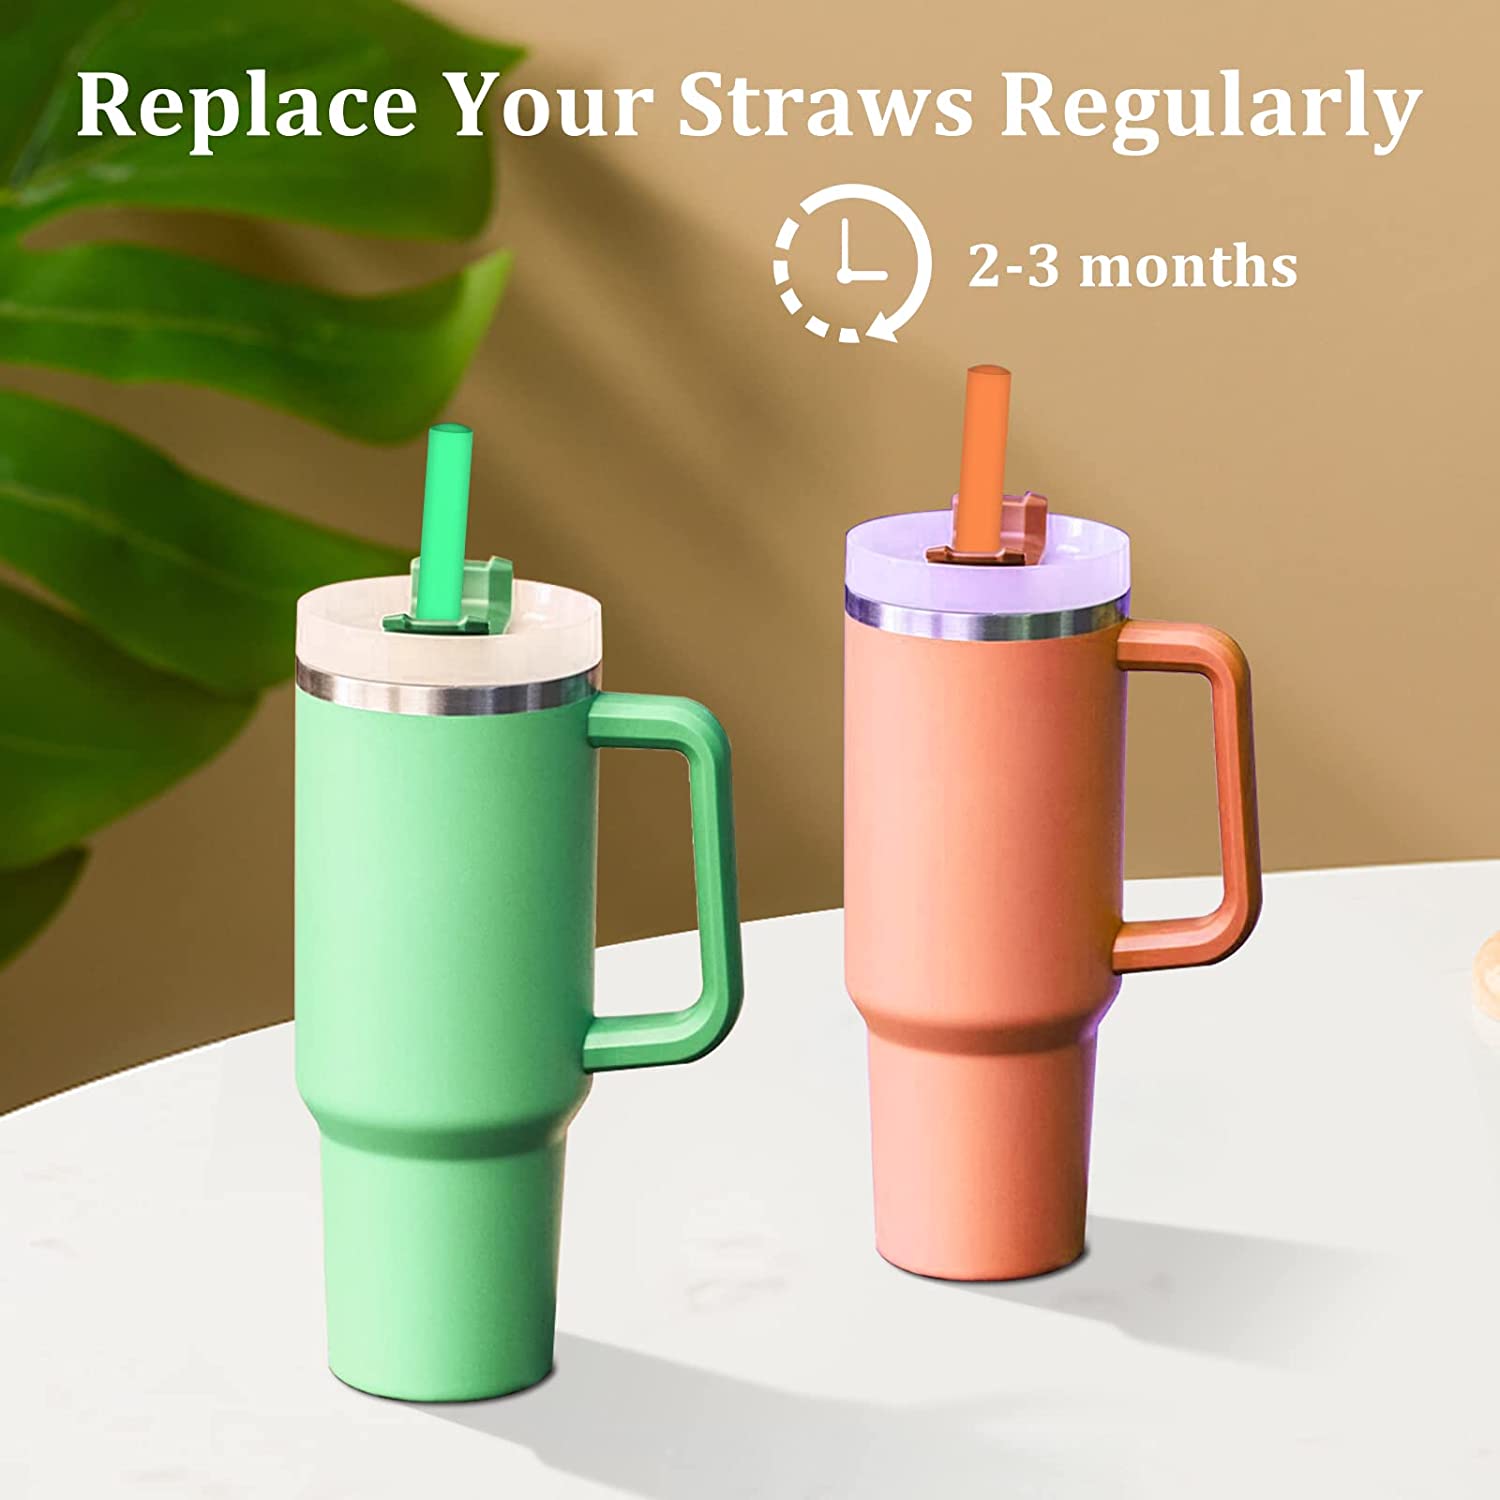 8 PCS Stainless Steel Straw for Stanley 40oz Adveture Quencher Tumbler, 12  inch Replacement Straw with 8 PCS Flower Straw Cover, Metal Straw for